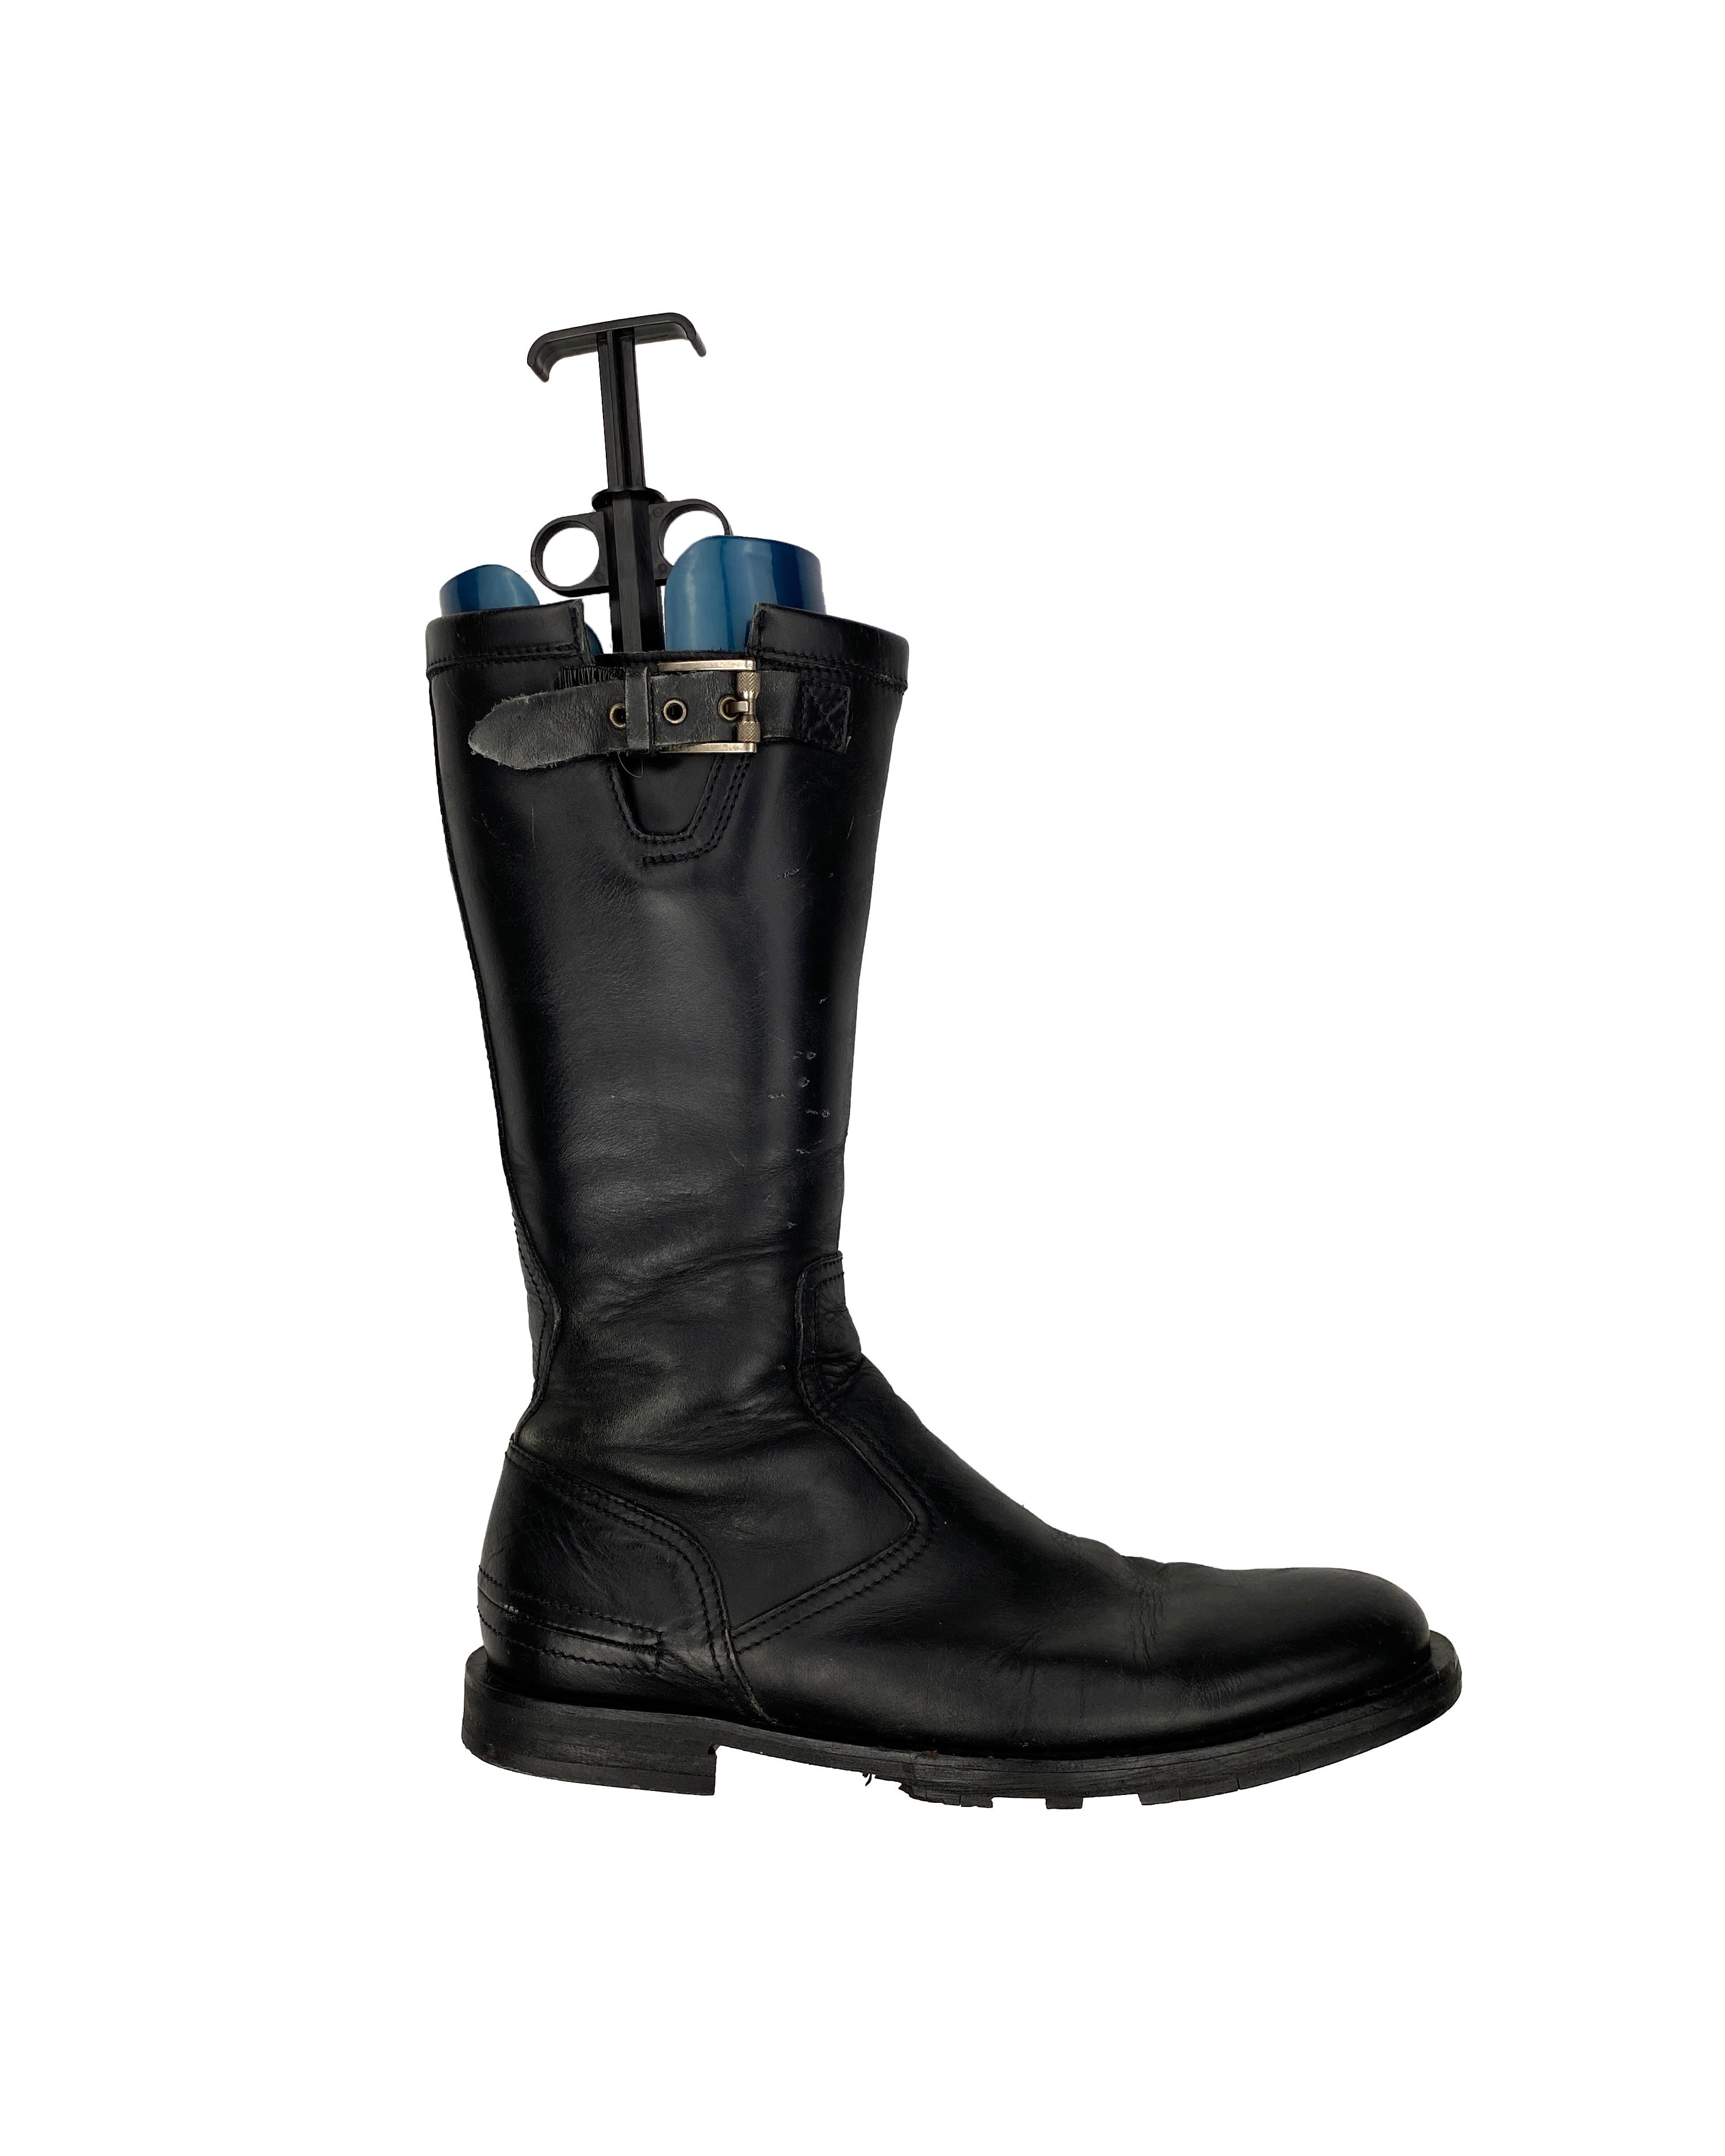 AW04 Dior Homme Victim of The Crime Moto Boots Hightop (sz 42) - 15